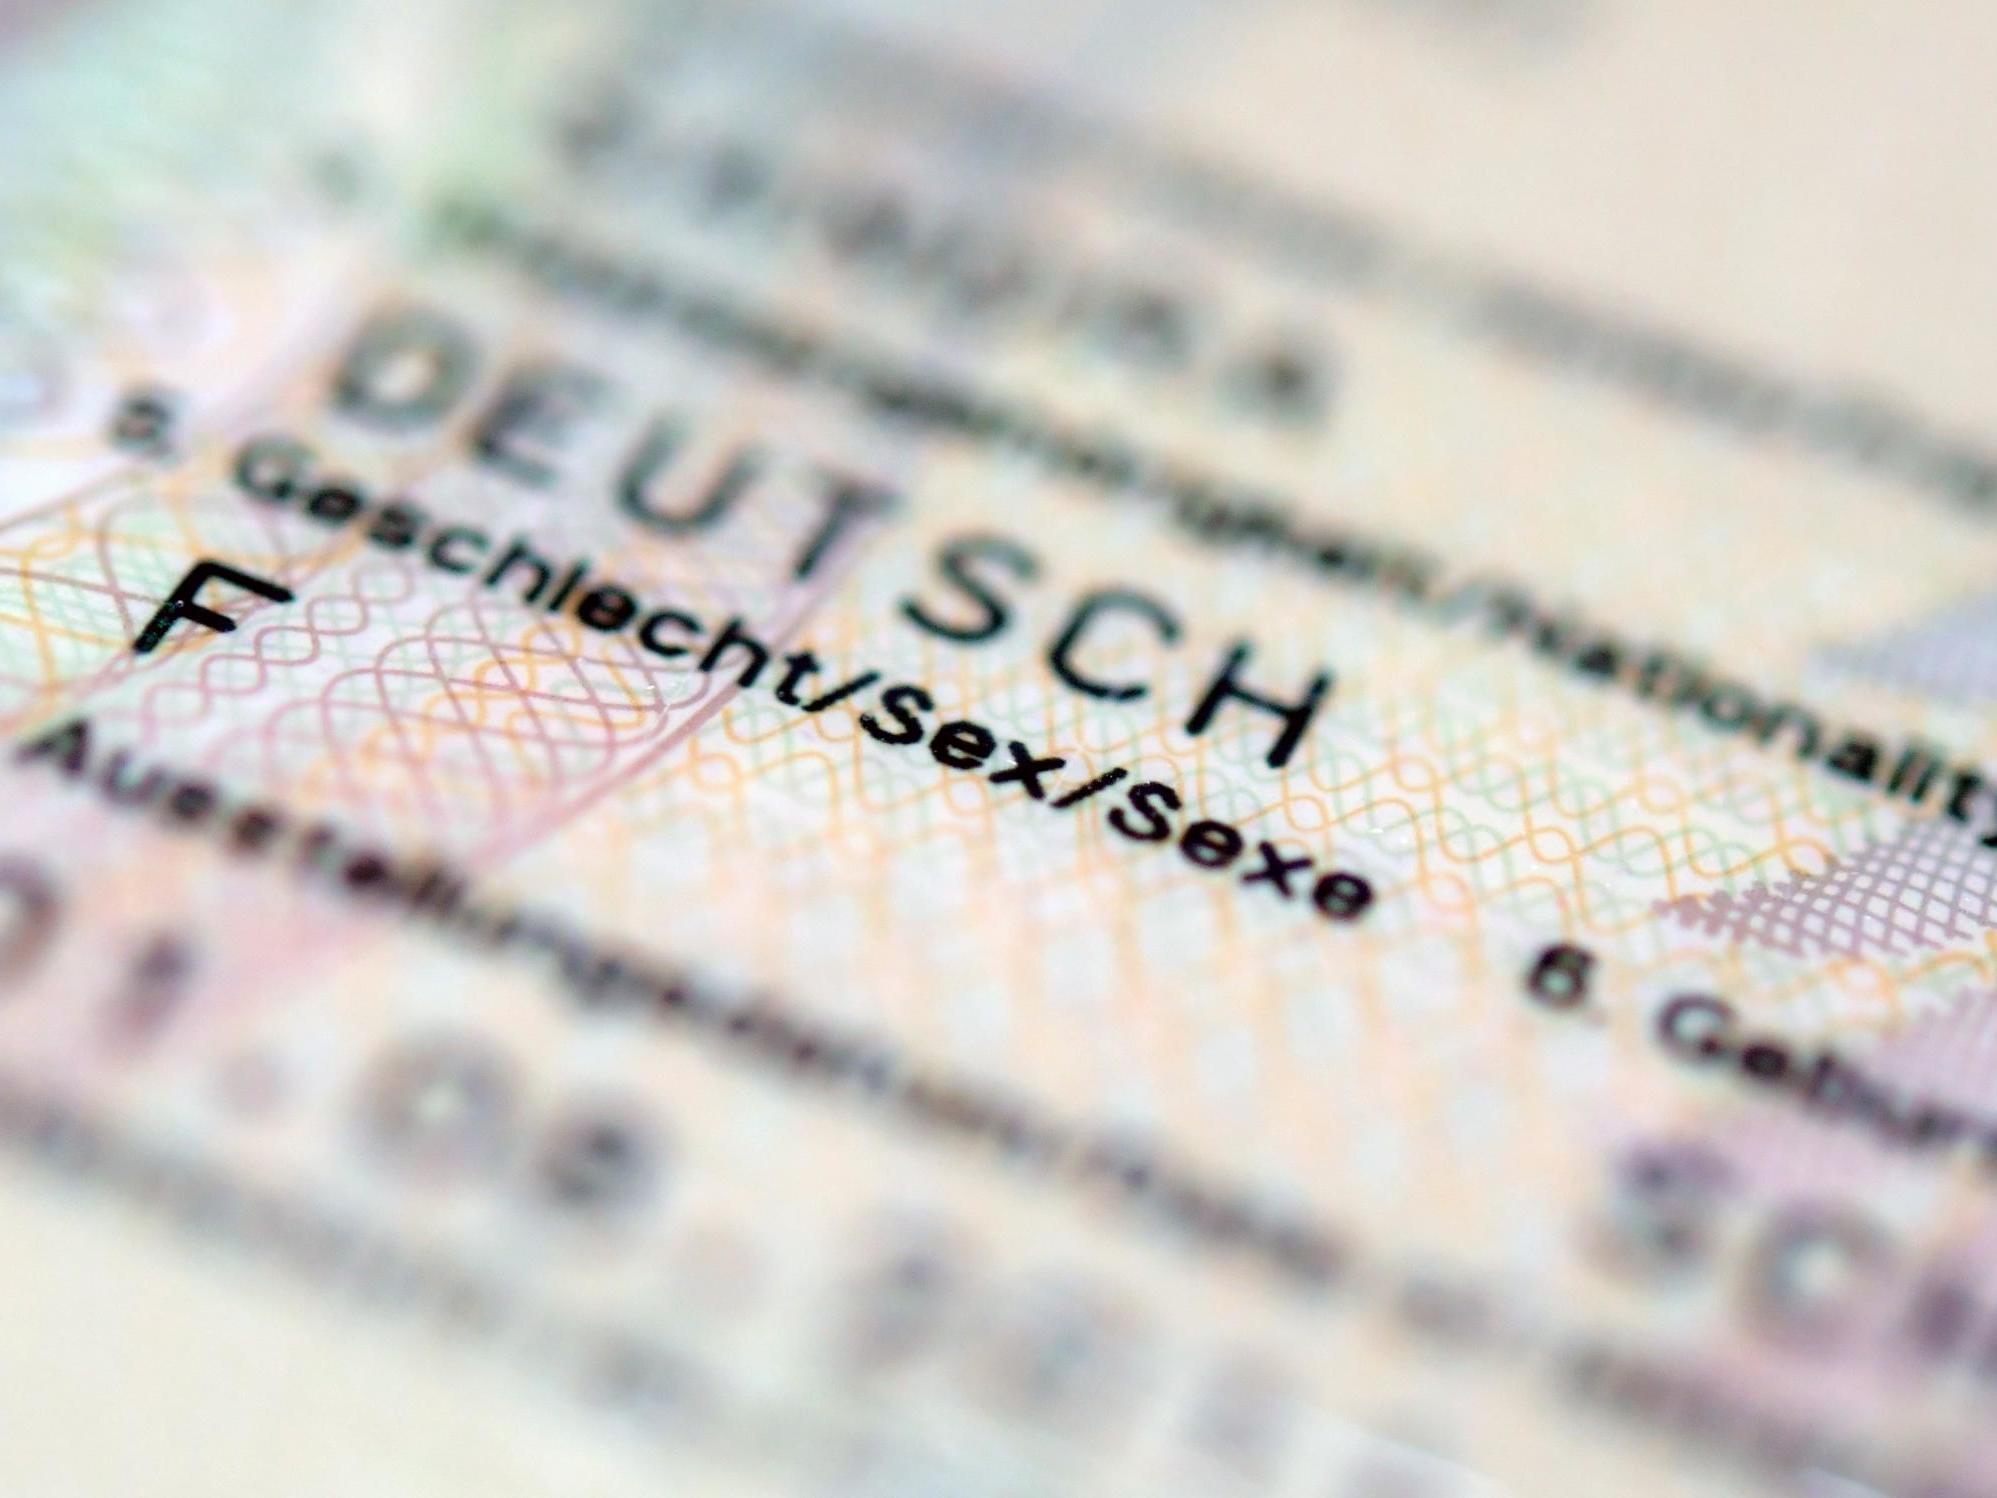 In 2016 Germany received 684 passport requests, with the majority submitted after the Brexit referendum